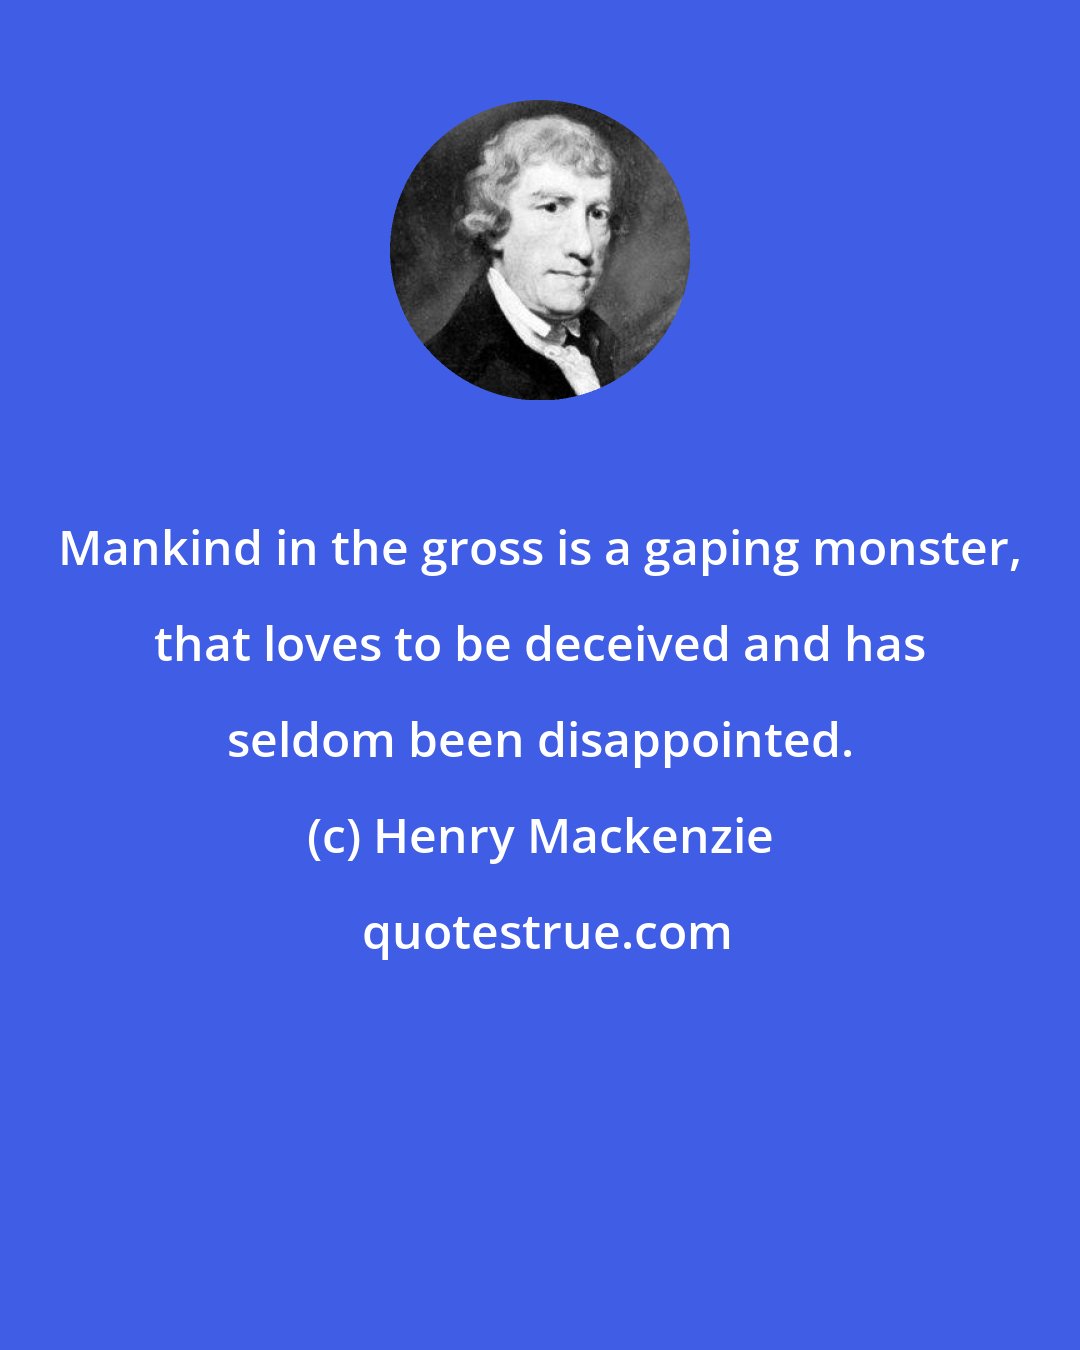 Henry Mackenzie: Mankind in the gross is a gaping monster, that loves to be deceived and has seldom been disappointed.